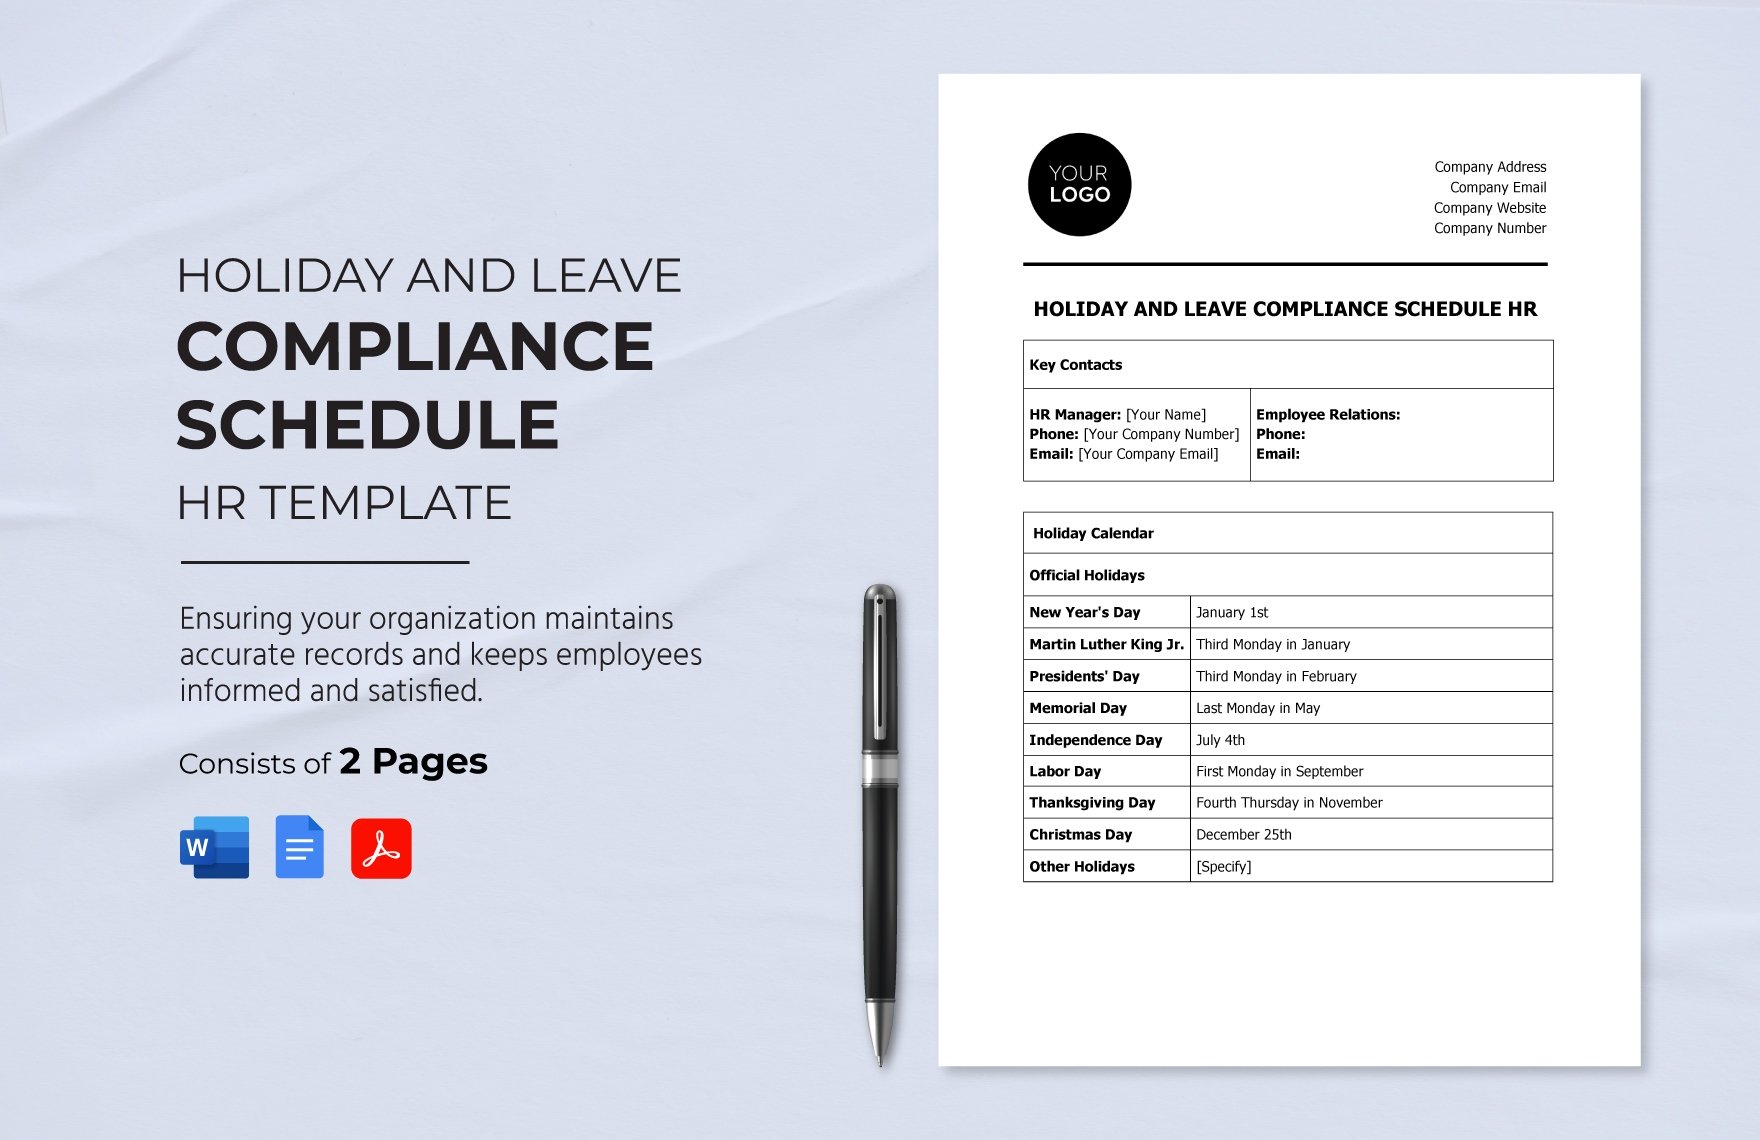 Holiday and Leave Compliance Schedule HR Template